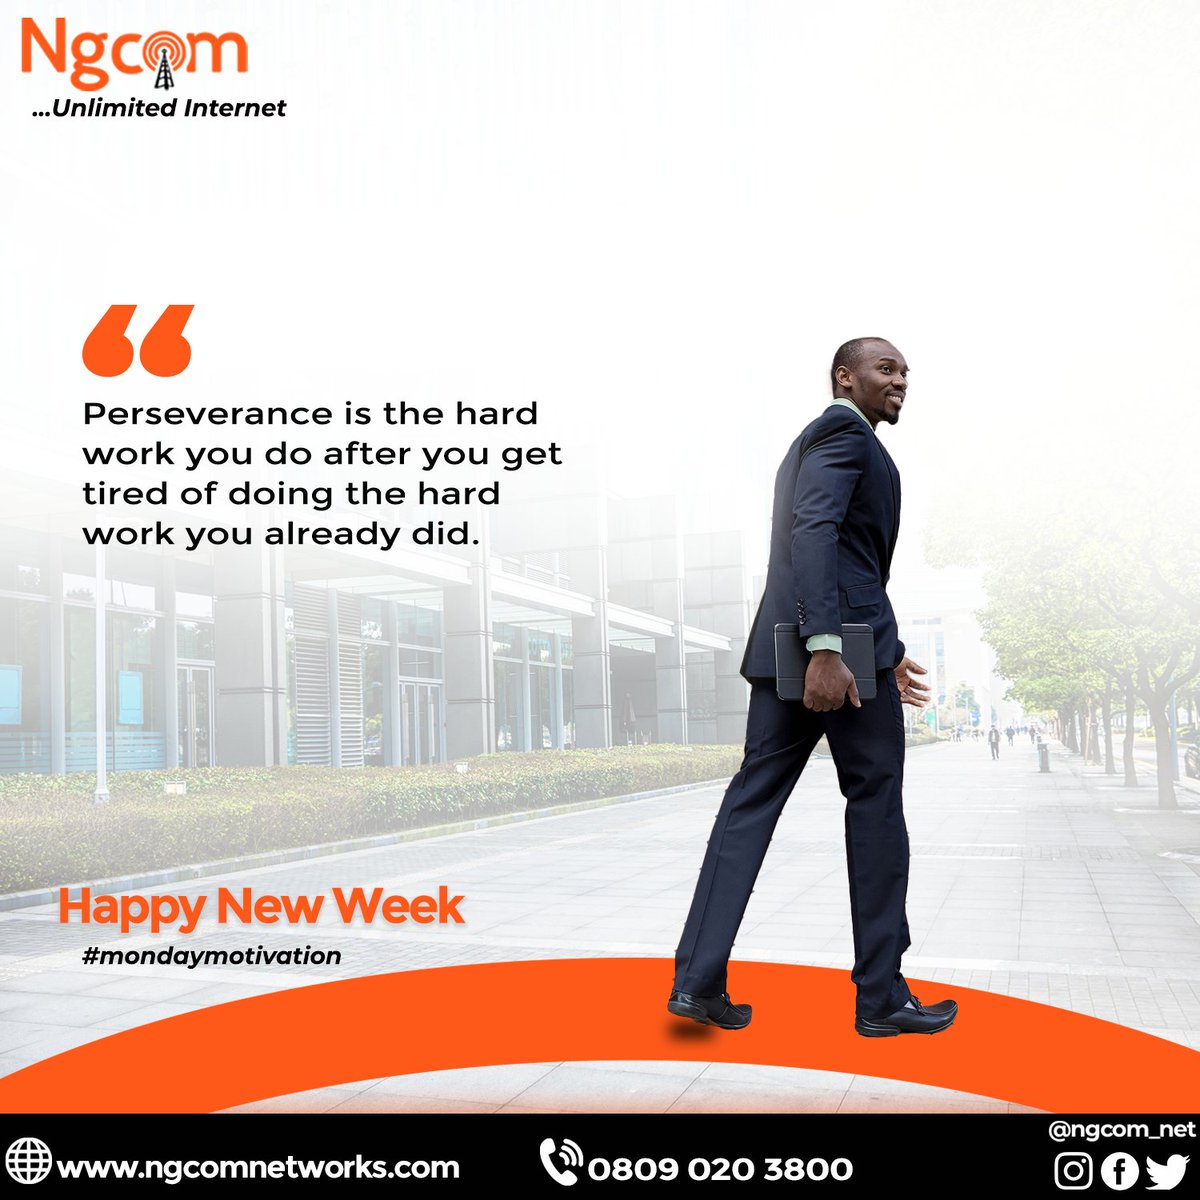 Dont stop , Keep moving ,Chase your goals .
Have a lovely and productive week .

#NGCOMNetworks #monday #monday #motivation #newgoals #monday #positive #newweeknewgoals #value #strive #betterverion #inspirationalquotes #keepwining #goals #recordbroken #guinnessworldrecord #hilda